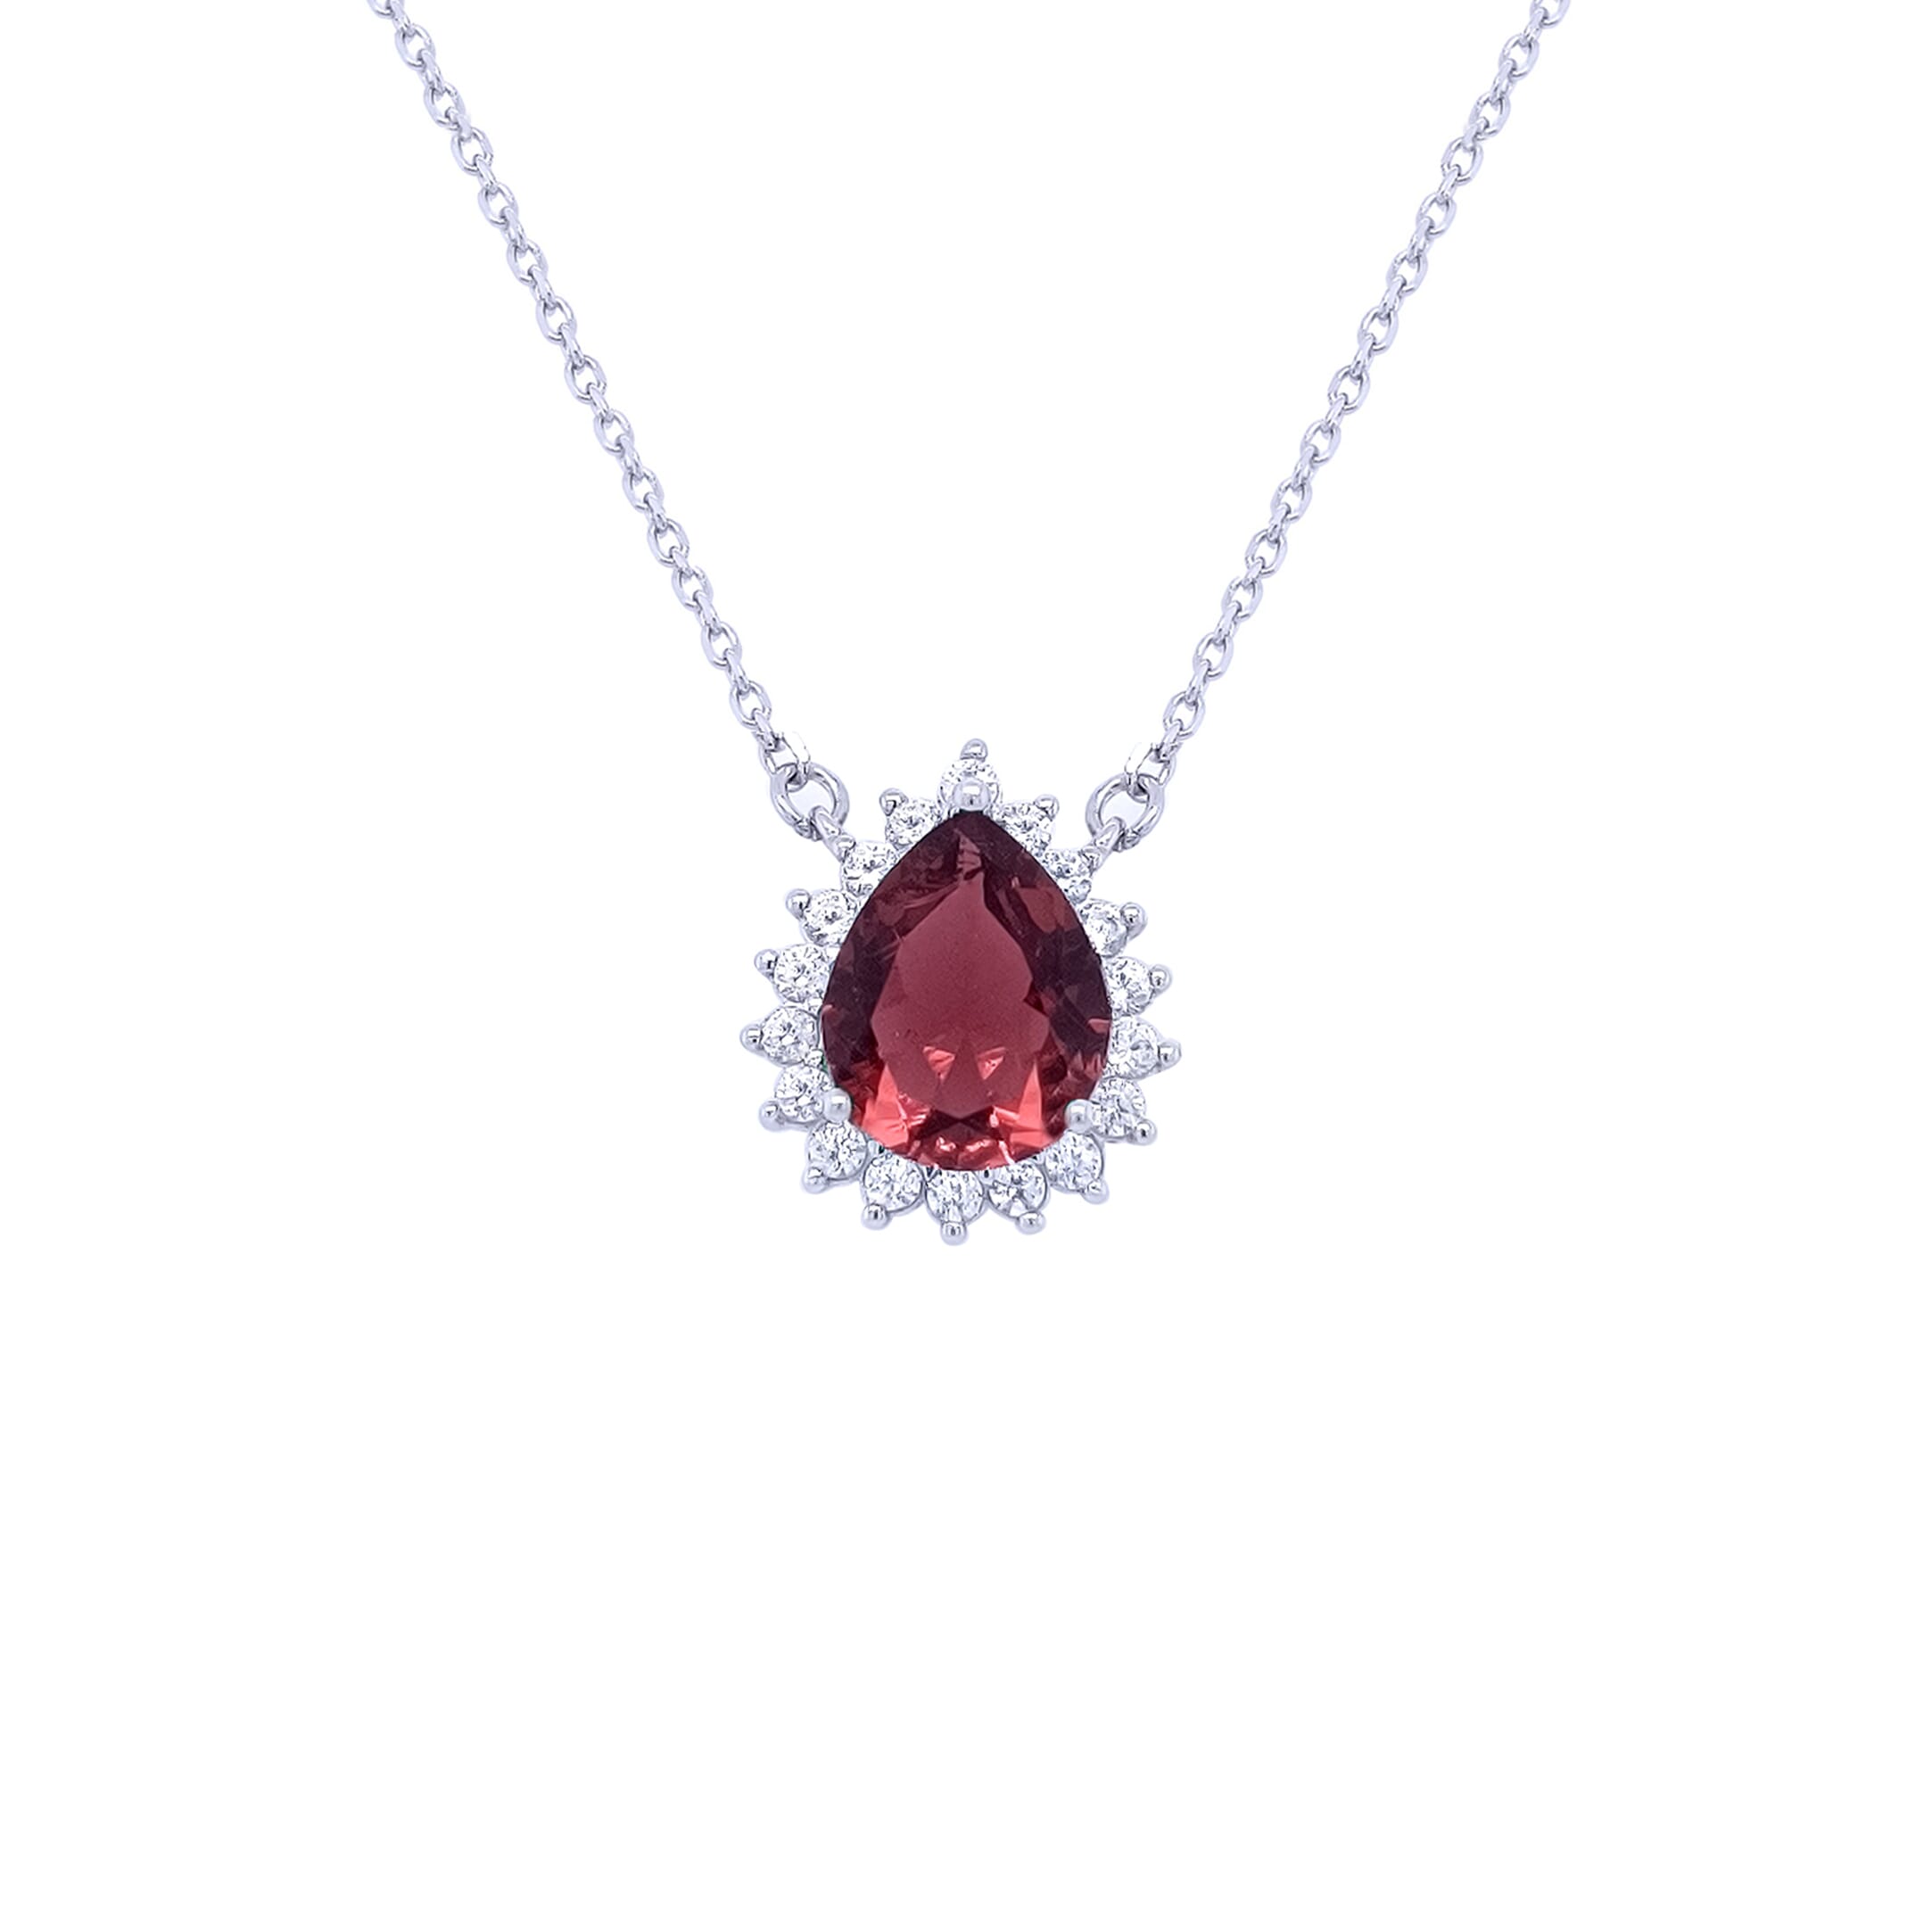 Asfour Sterling Silver 925 Chain With A Red Pear-shaped Pendant